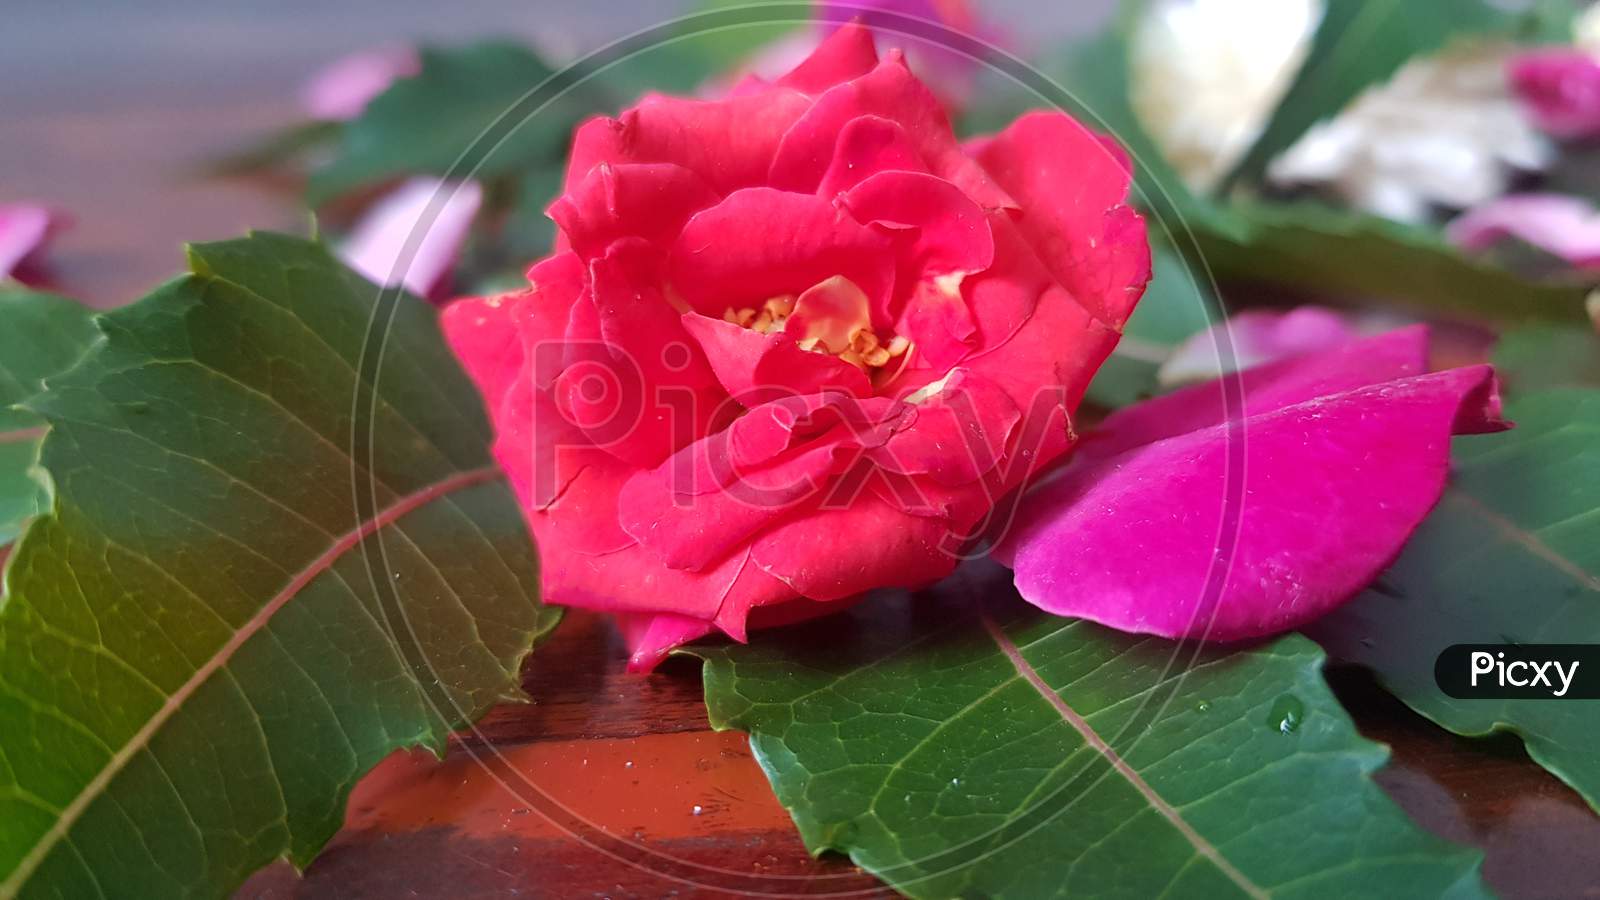 Pink rose in nature on wood background